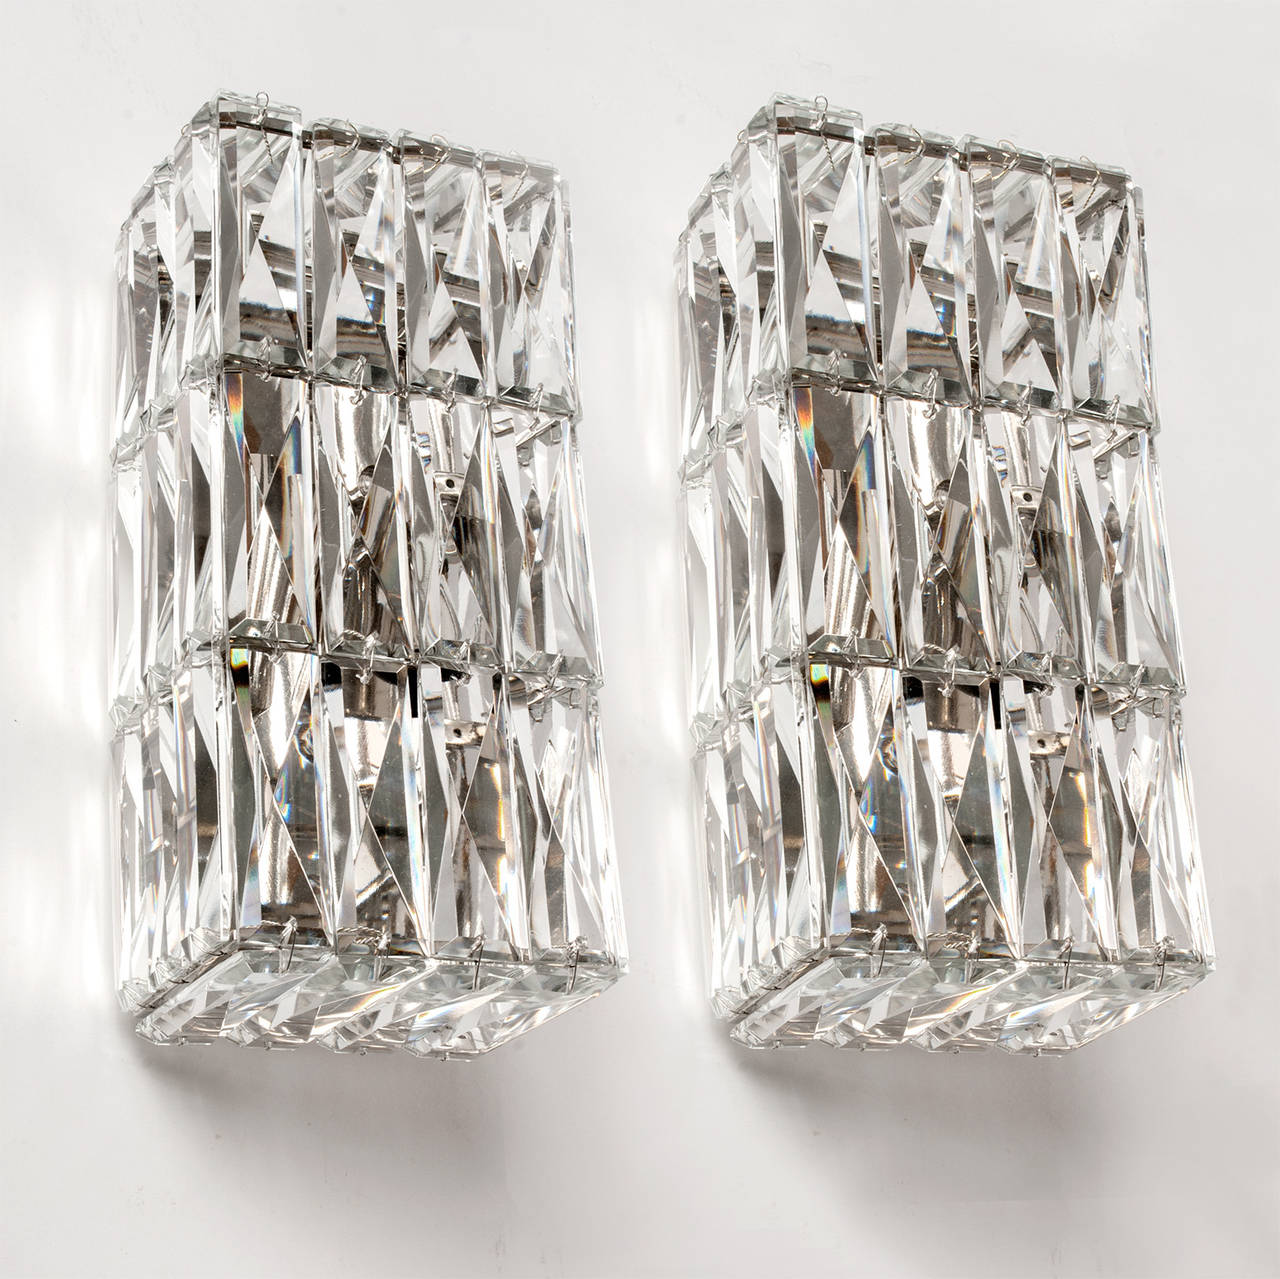 Pair of mid-century Austrian faceted crystal sconces made by Bakalowits & Sohne. Sconces mount with nickel plated and lacquered back plates, each with two sockets. New rewired for use in the USA. Height: 10”, width: 4.75”, depth: 4